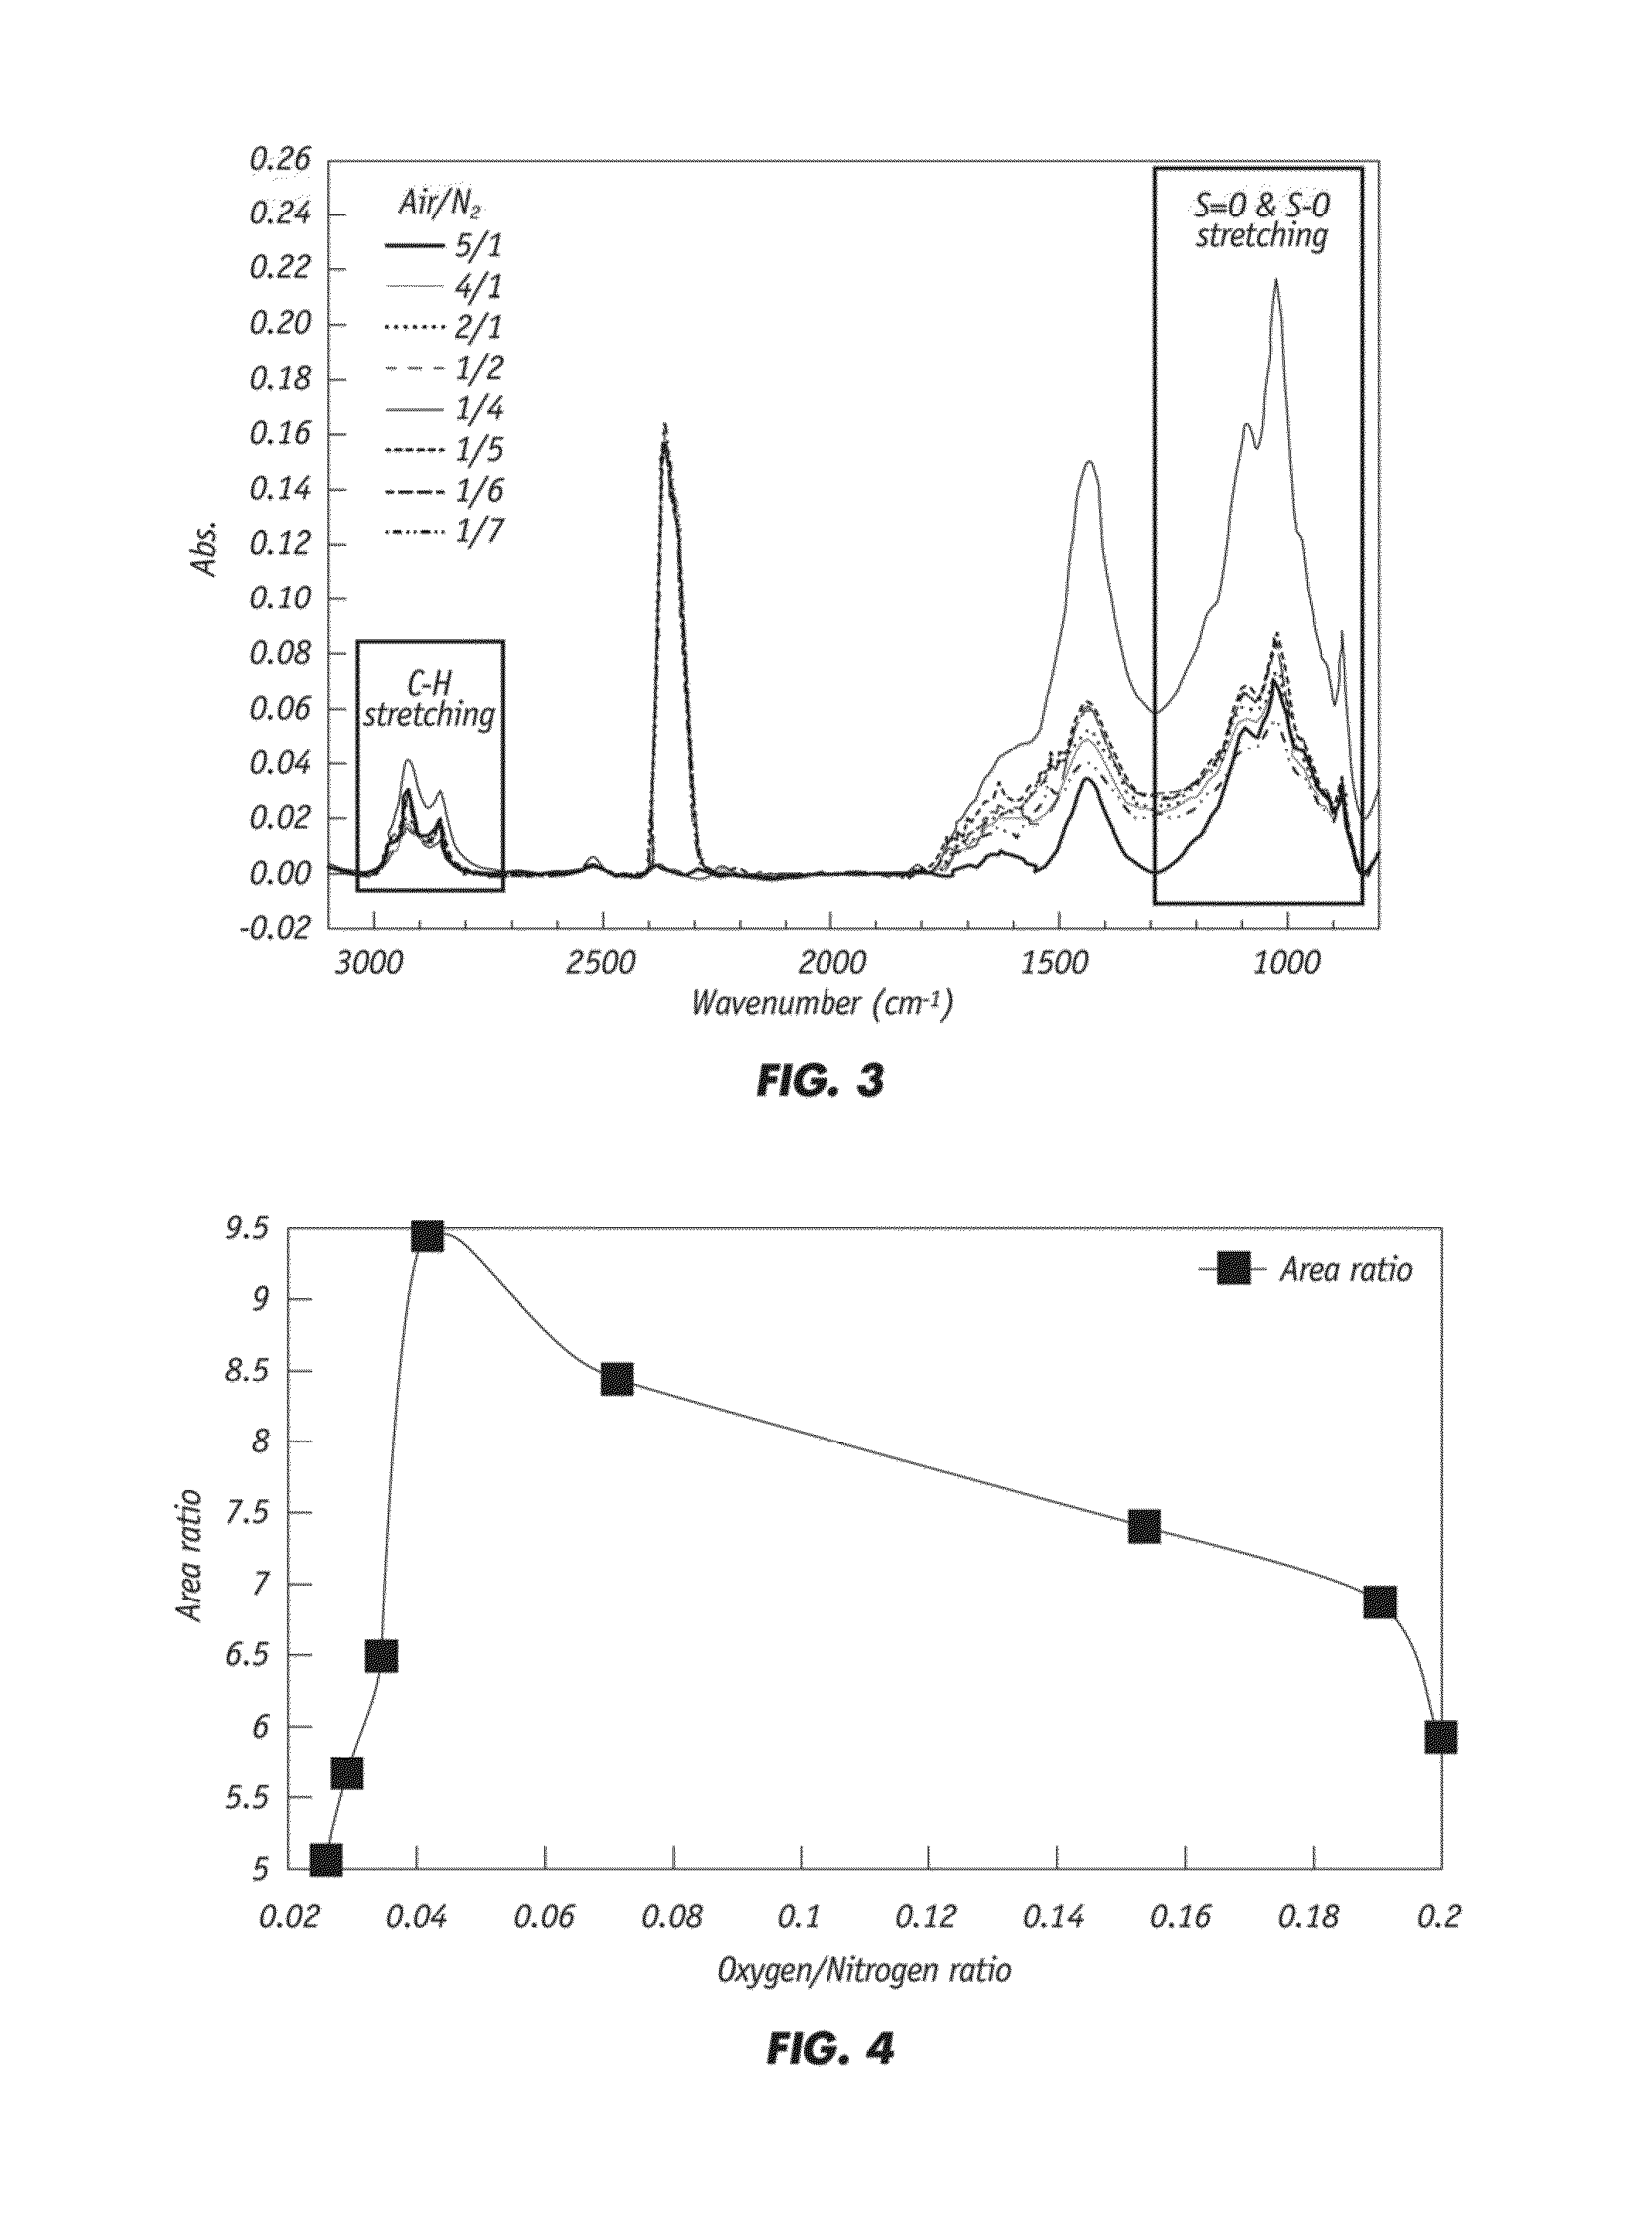 Method for producing improved rubberized concrete using waste rubber tires